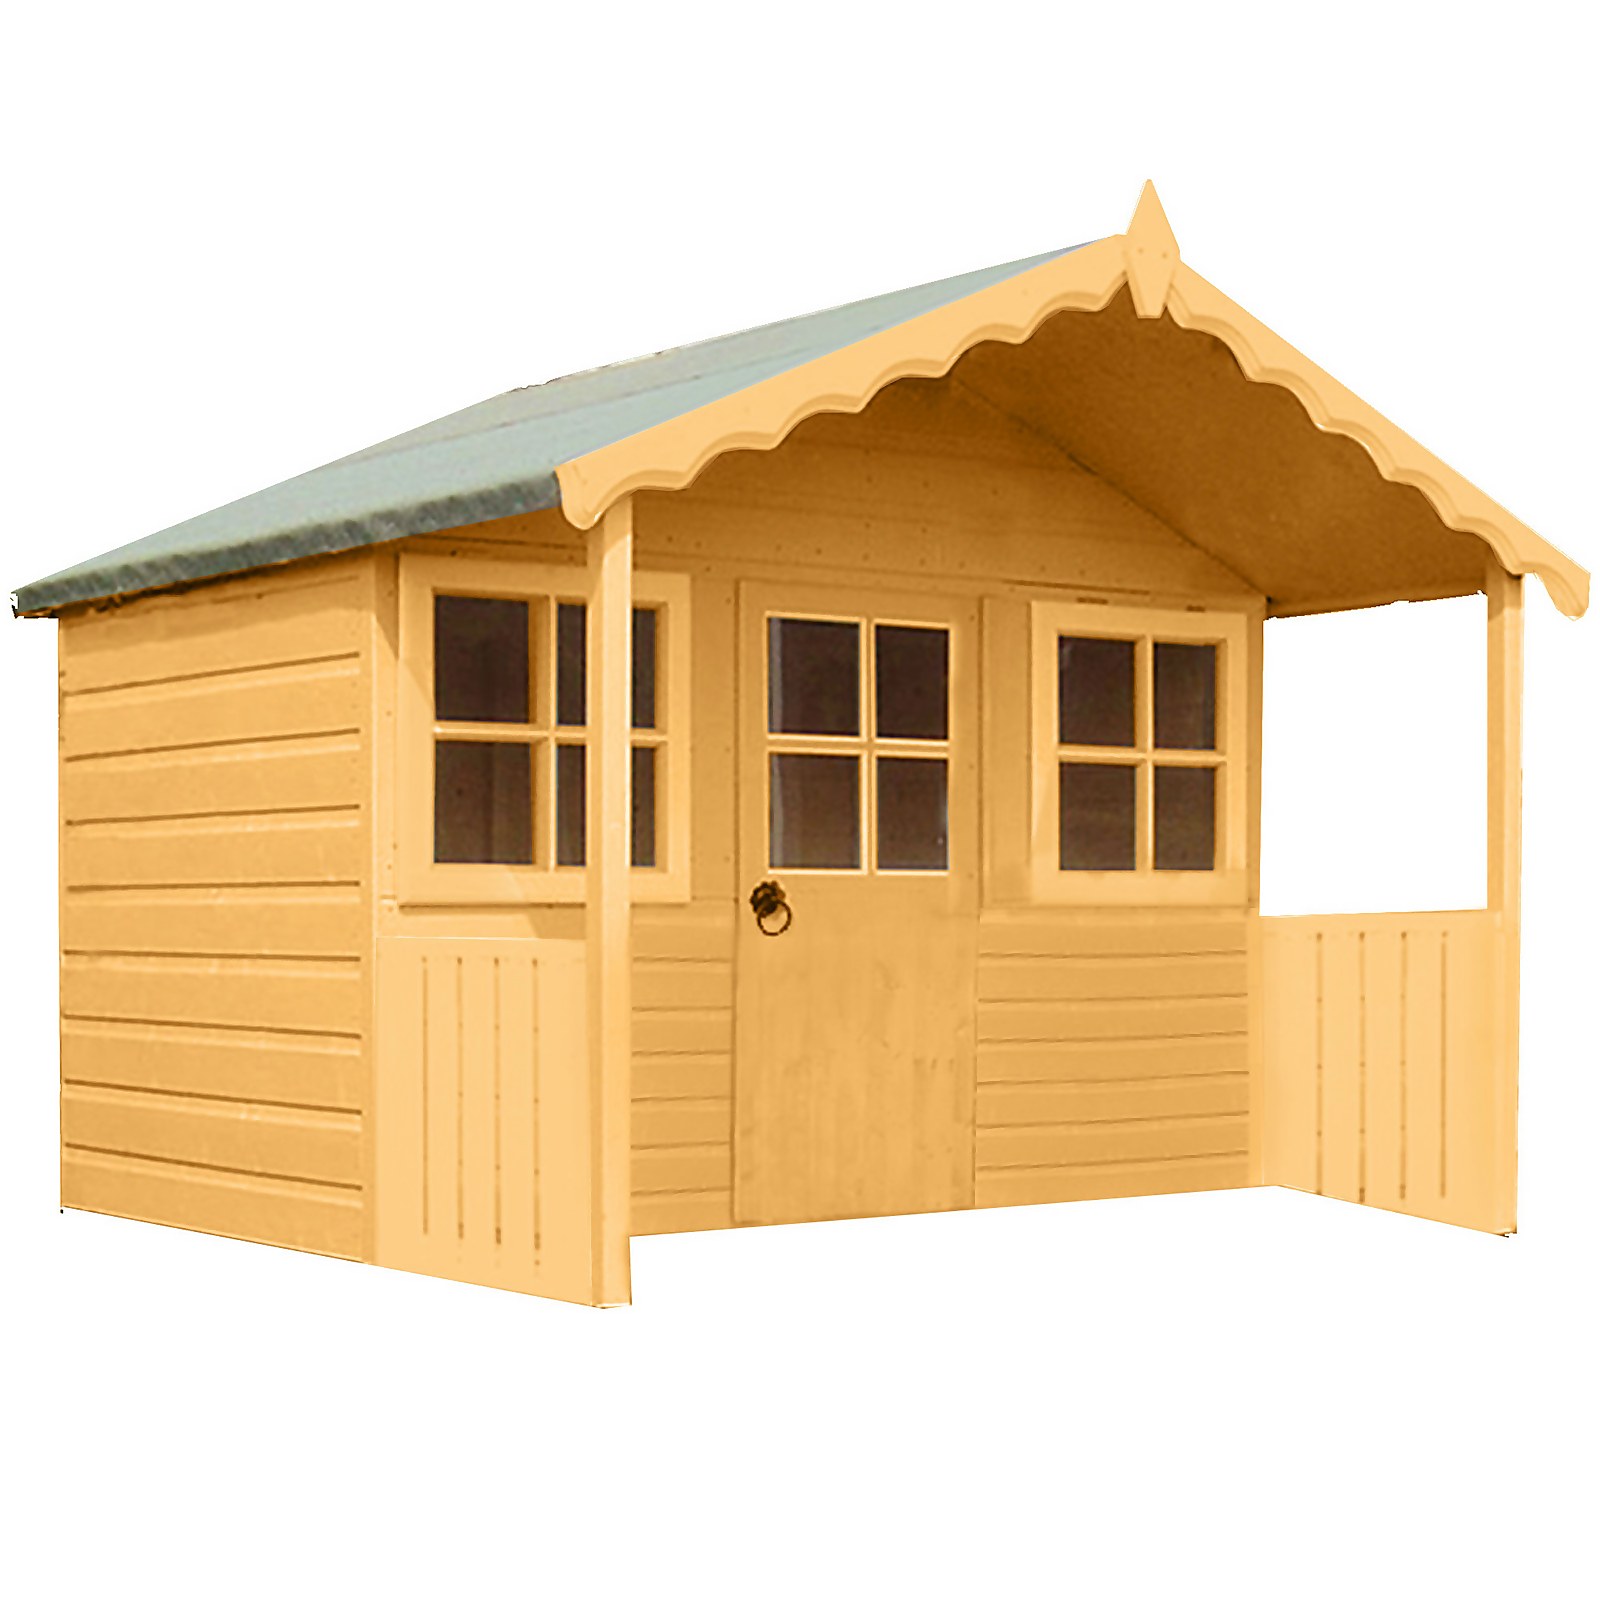 Shire 6 x 5ft Stork Kids Wooden Playhouse - Including Installation